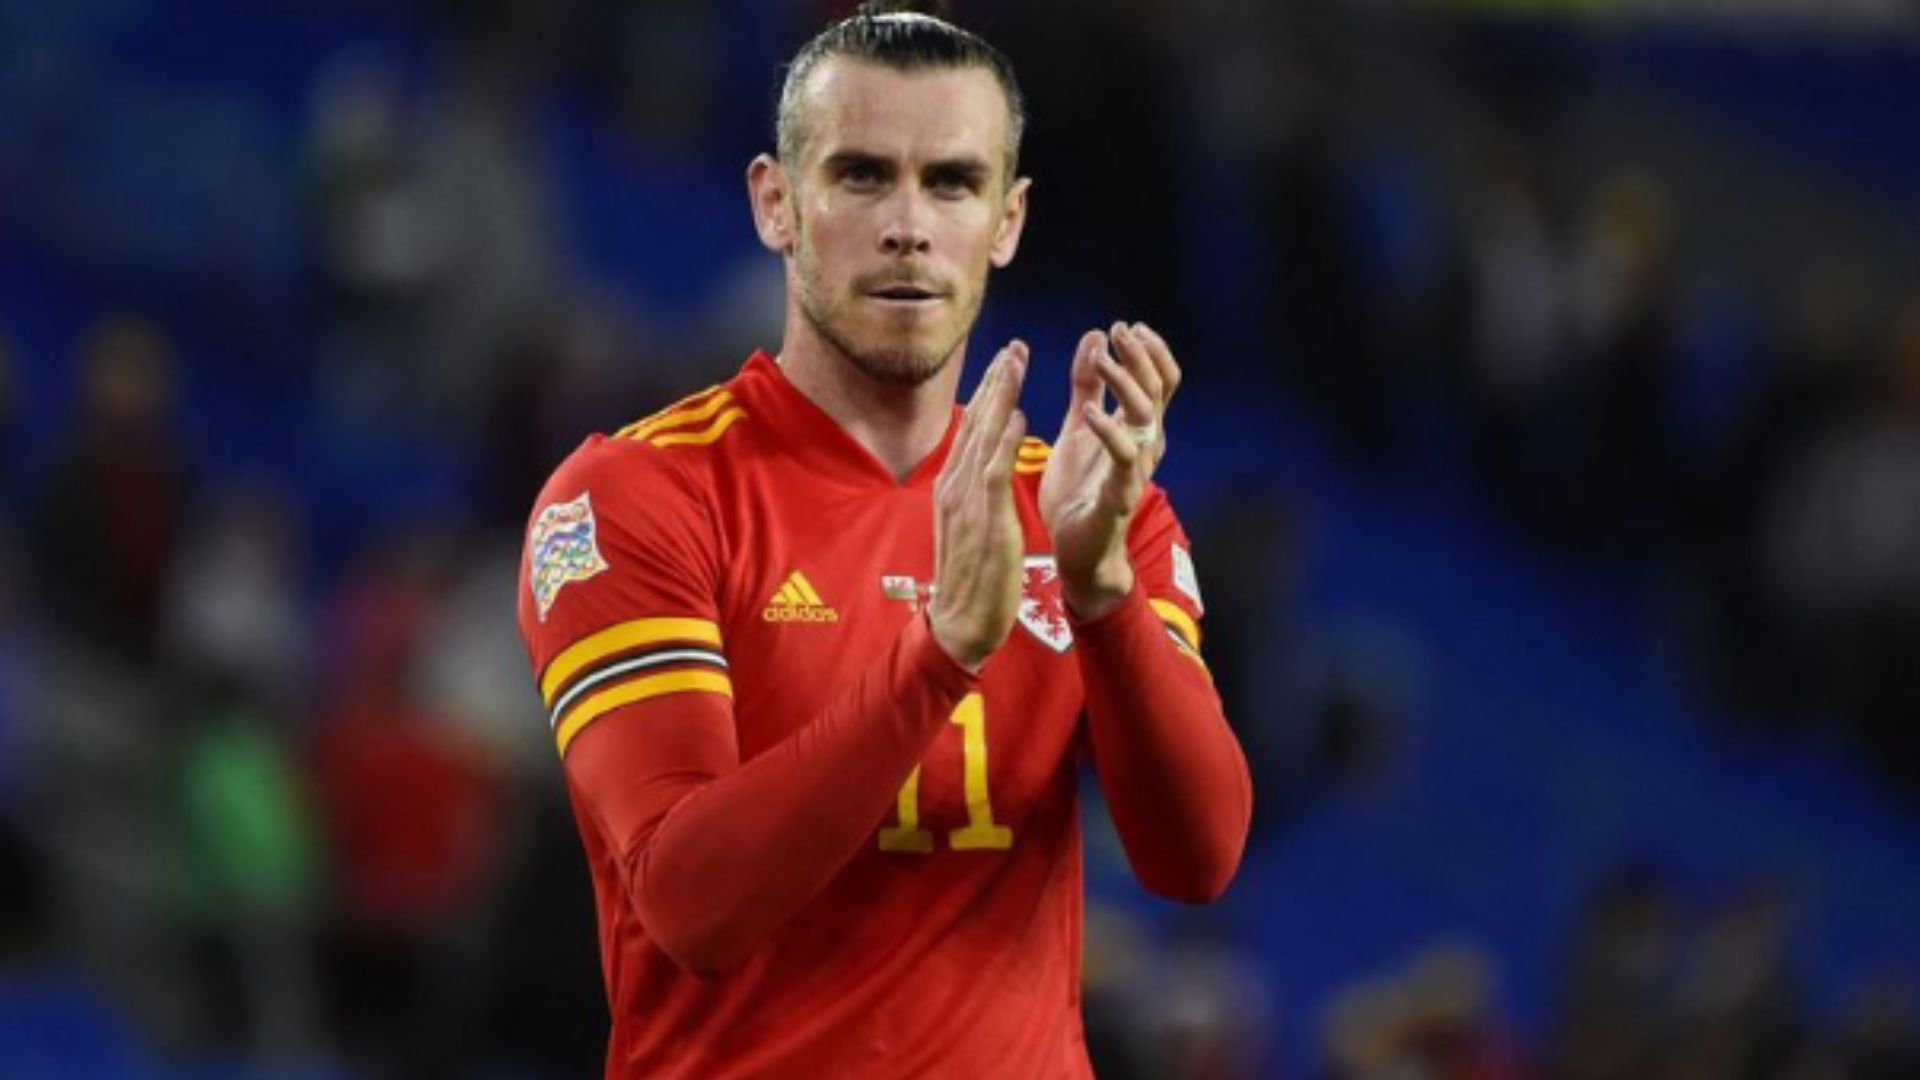 Soccer-Wales should learn dark arts in front of World Cup says Bale